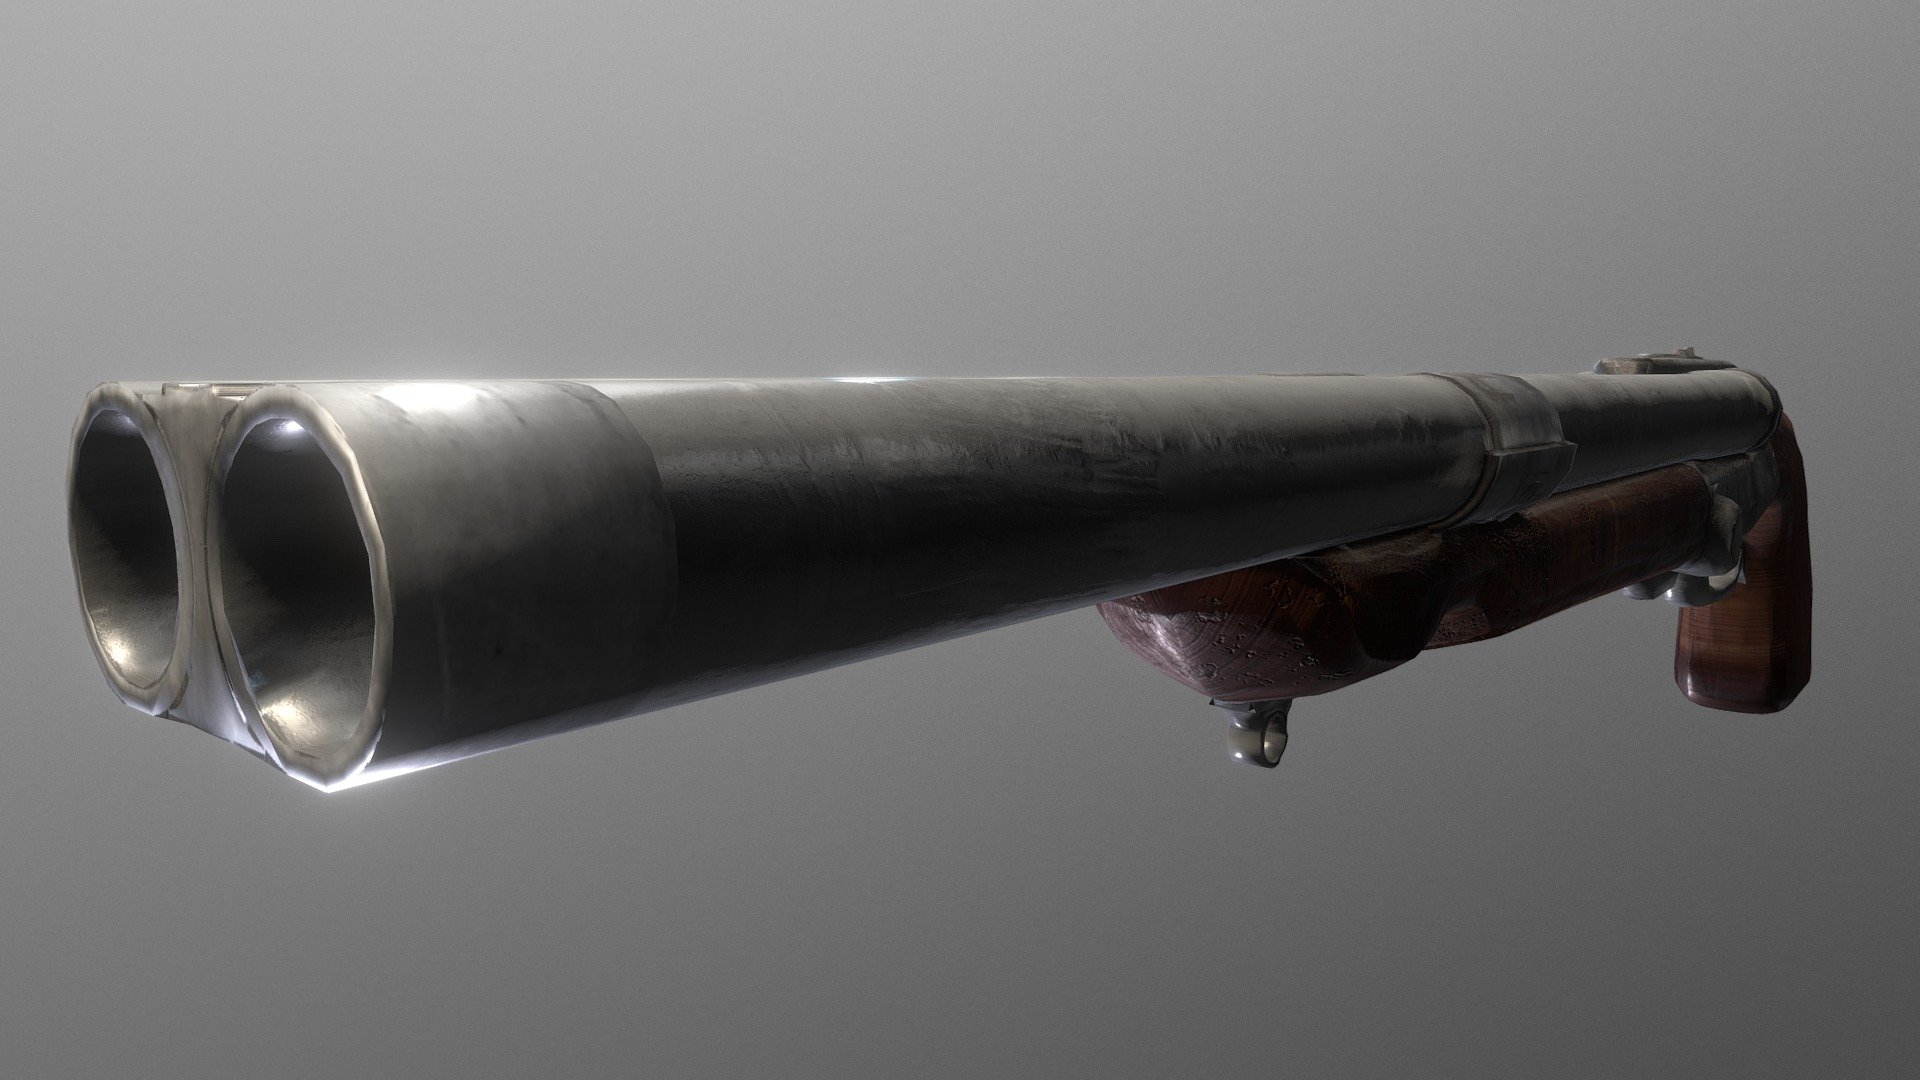 Wanted more practice weapon modelling and making pbr textures in substance, so I remade the super shotgun from Doom 2016!

Modeled - Max, ZBR
Retopo- 3DCoat
Texturing - Substance
Rendered - UE4 - DOOM - Super Shotgun remake - 3D model by Blake Beauchamp (@BlakeIn3D) 3d model